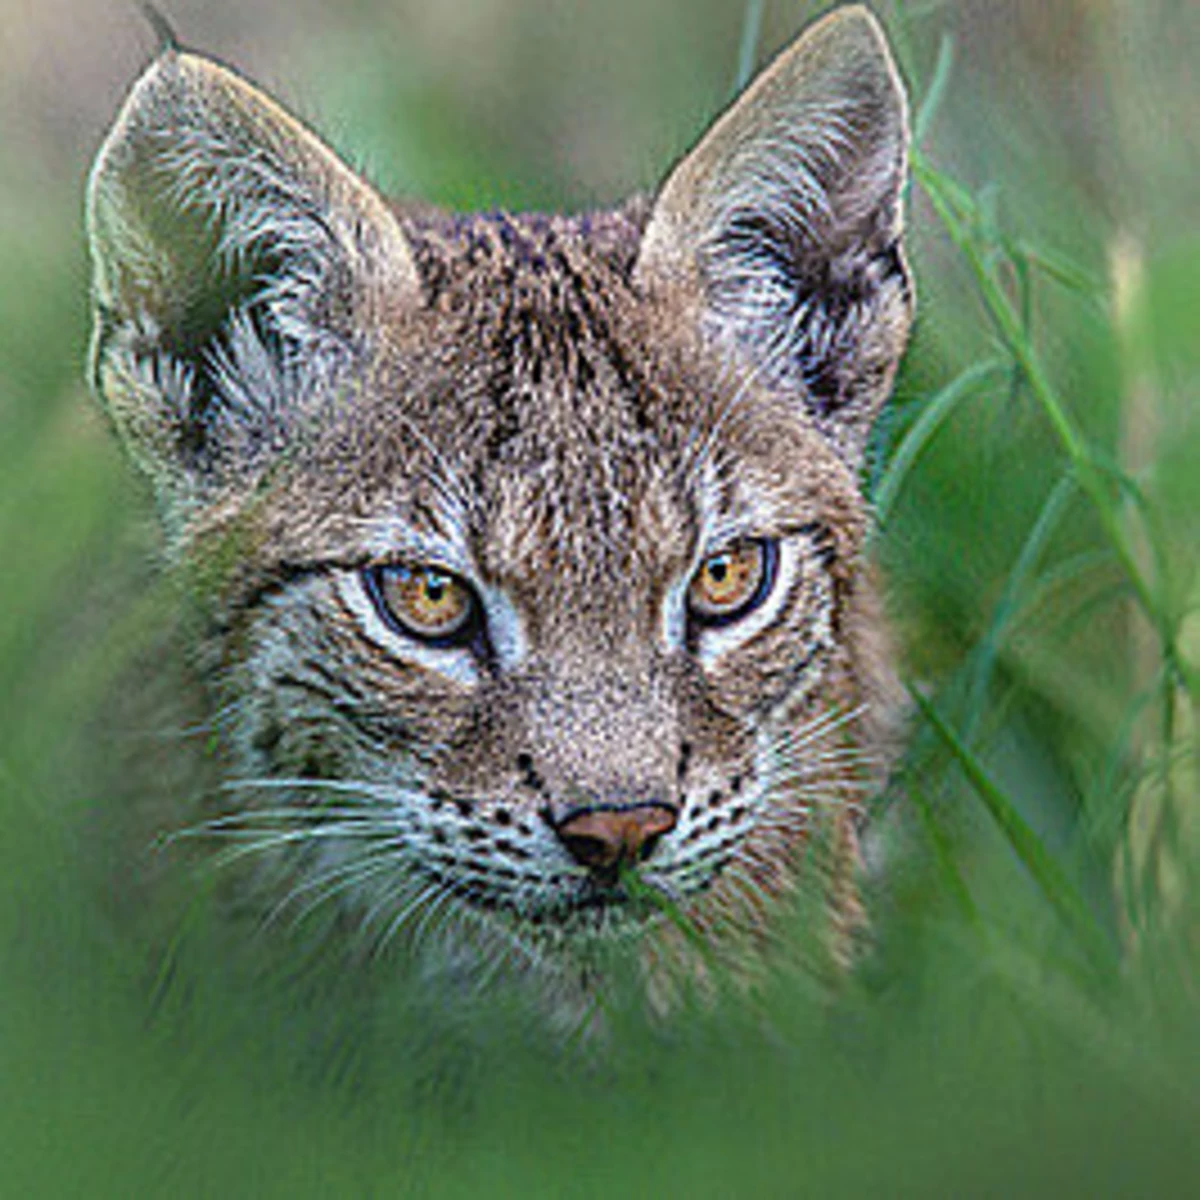 Bobcats in New Jersey: Types & Where They Live - AZ Animals